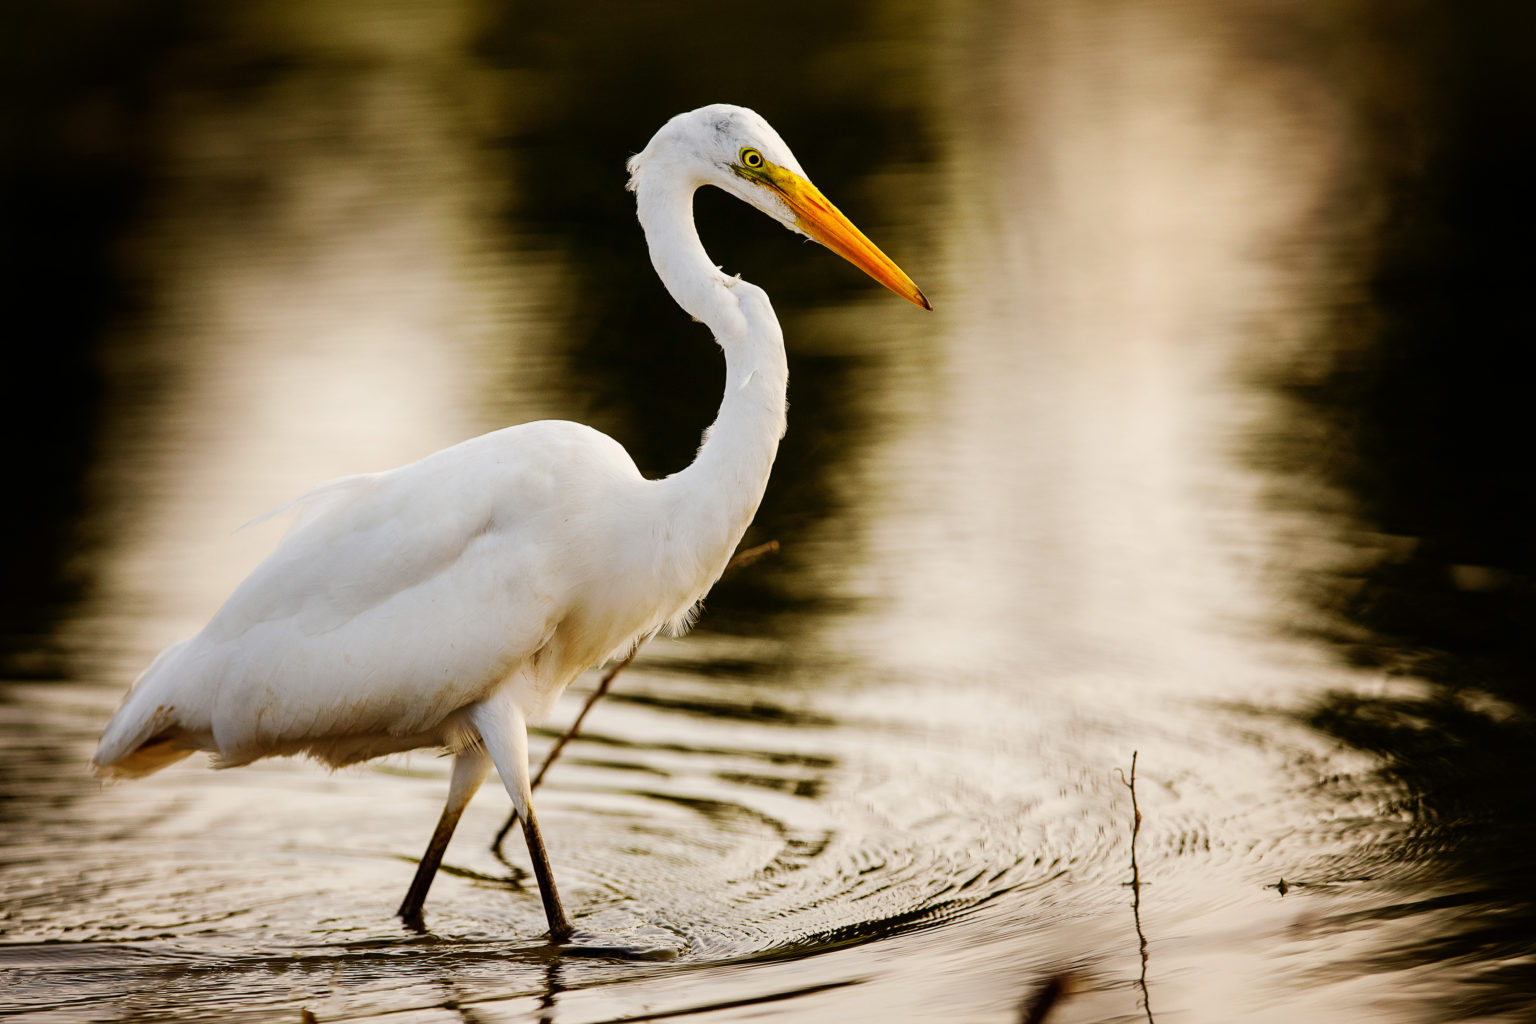 A white great egret wades through a pond